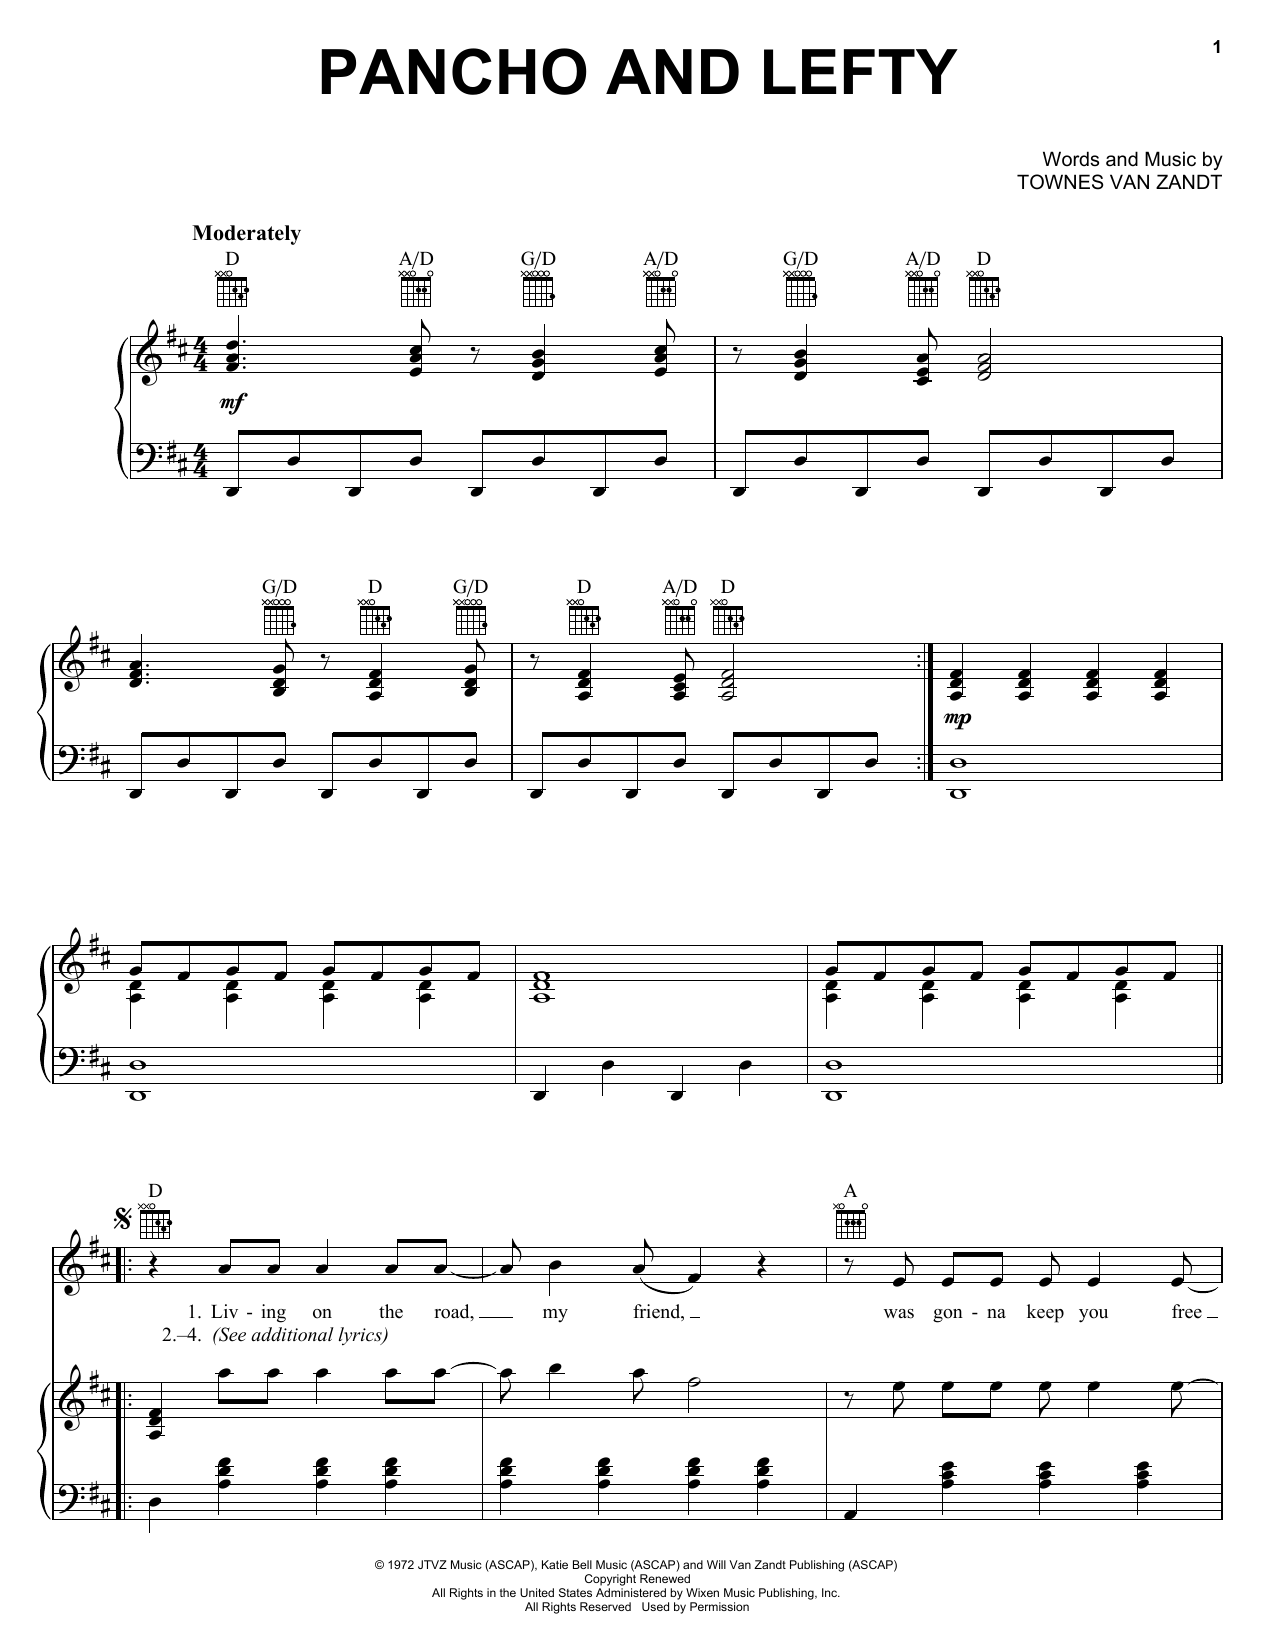 Download Townes Van Zandt Pancho And Lefty Sheet Music